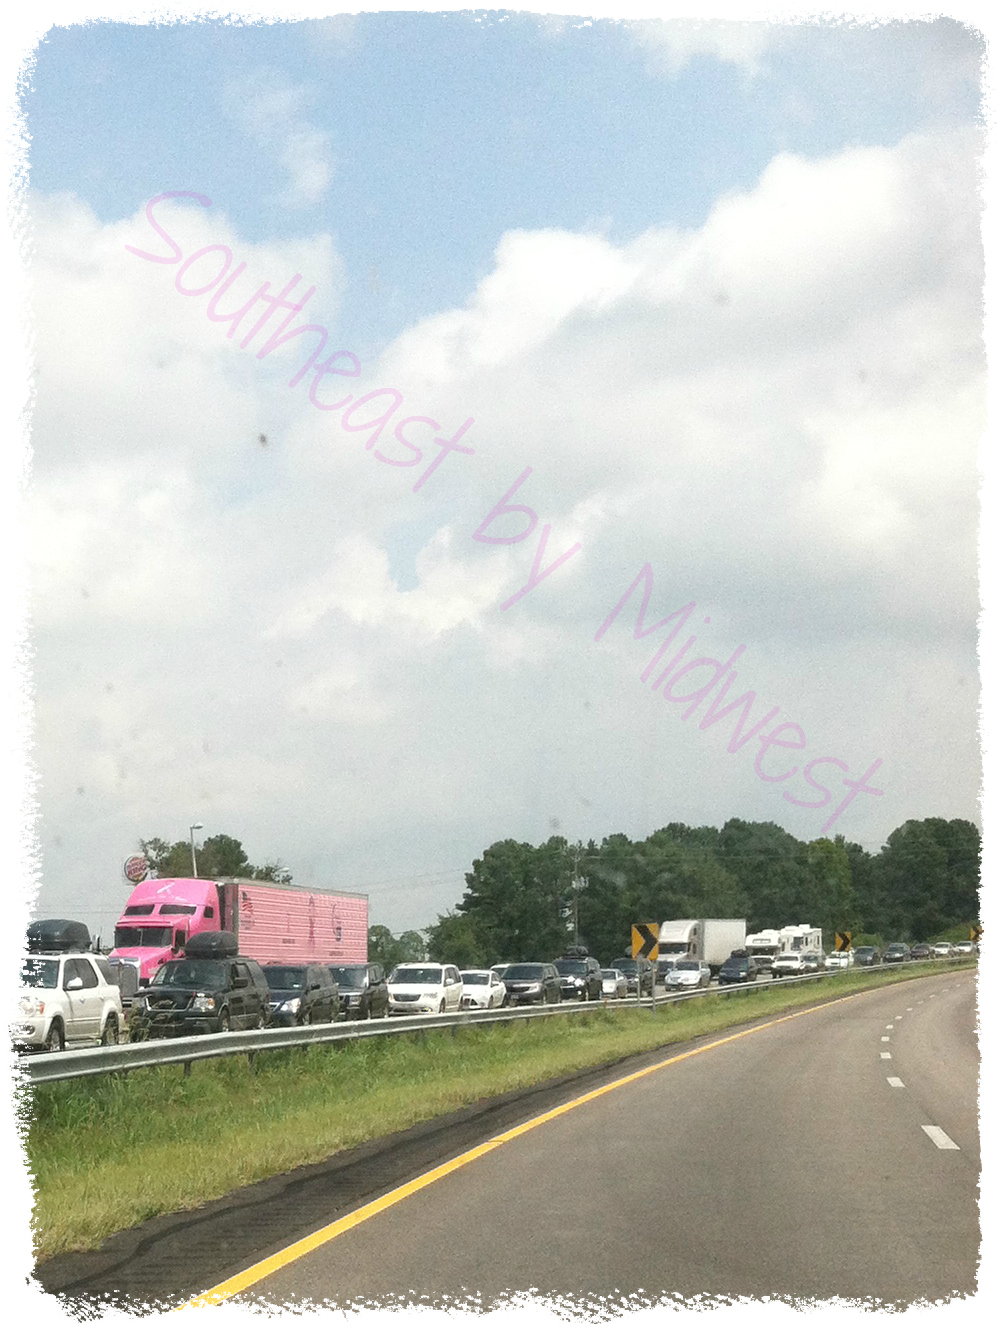 Breast Cancer Awareness Semi Truck on southeastbymidwest.com #dailyphoto